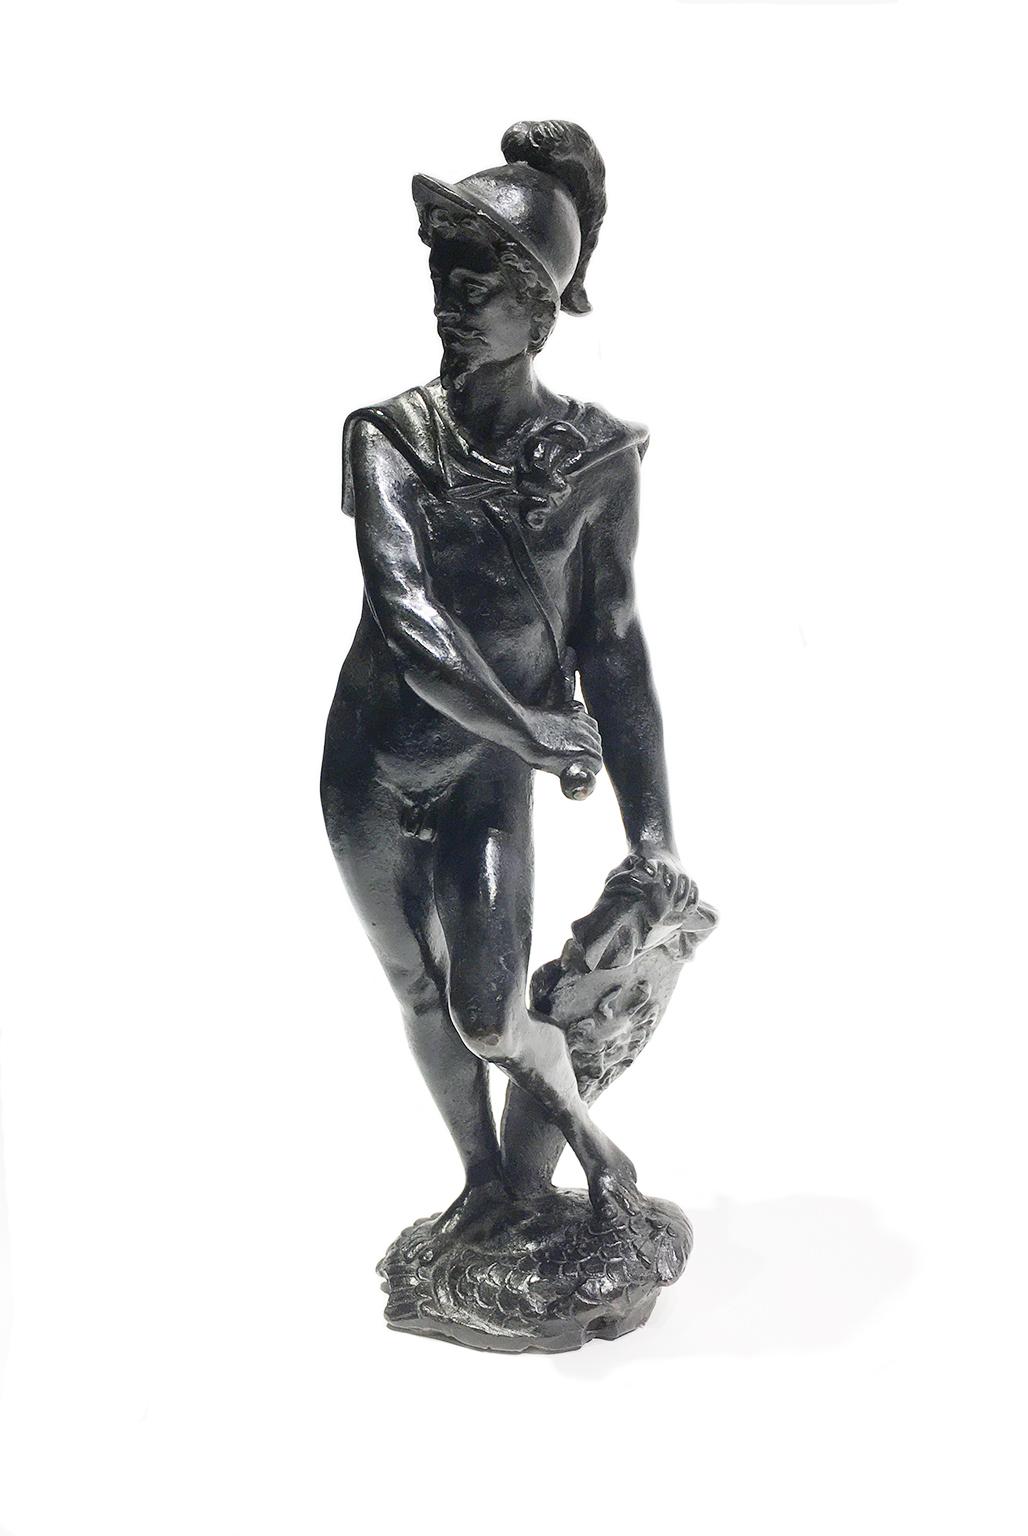 Perseus (or Mars?)
Padua, first half of the 17th century
follower of Tiziano Aspetti (Padua, 1559 - Pisa, 1607)
bronze with dark patina
State of conservation: the dark patina covering it has some gaps and some scratches.
Under the base there is